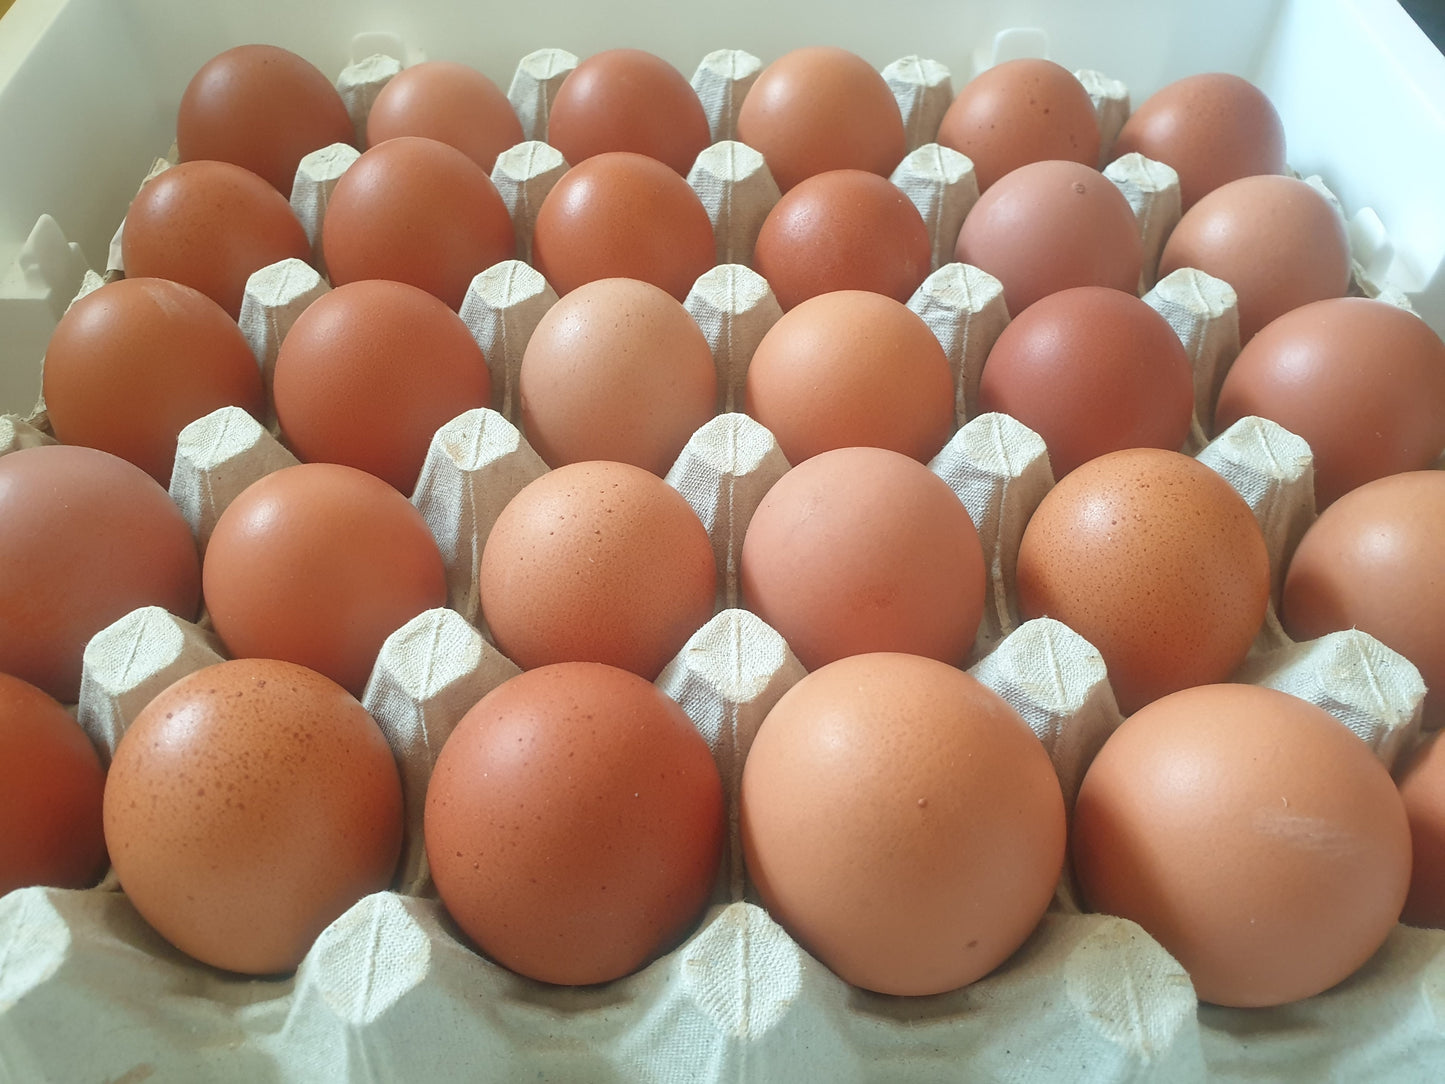 Pasture Raised Eggs From hens fed on GMO & chemical free feed